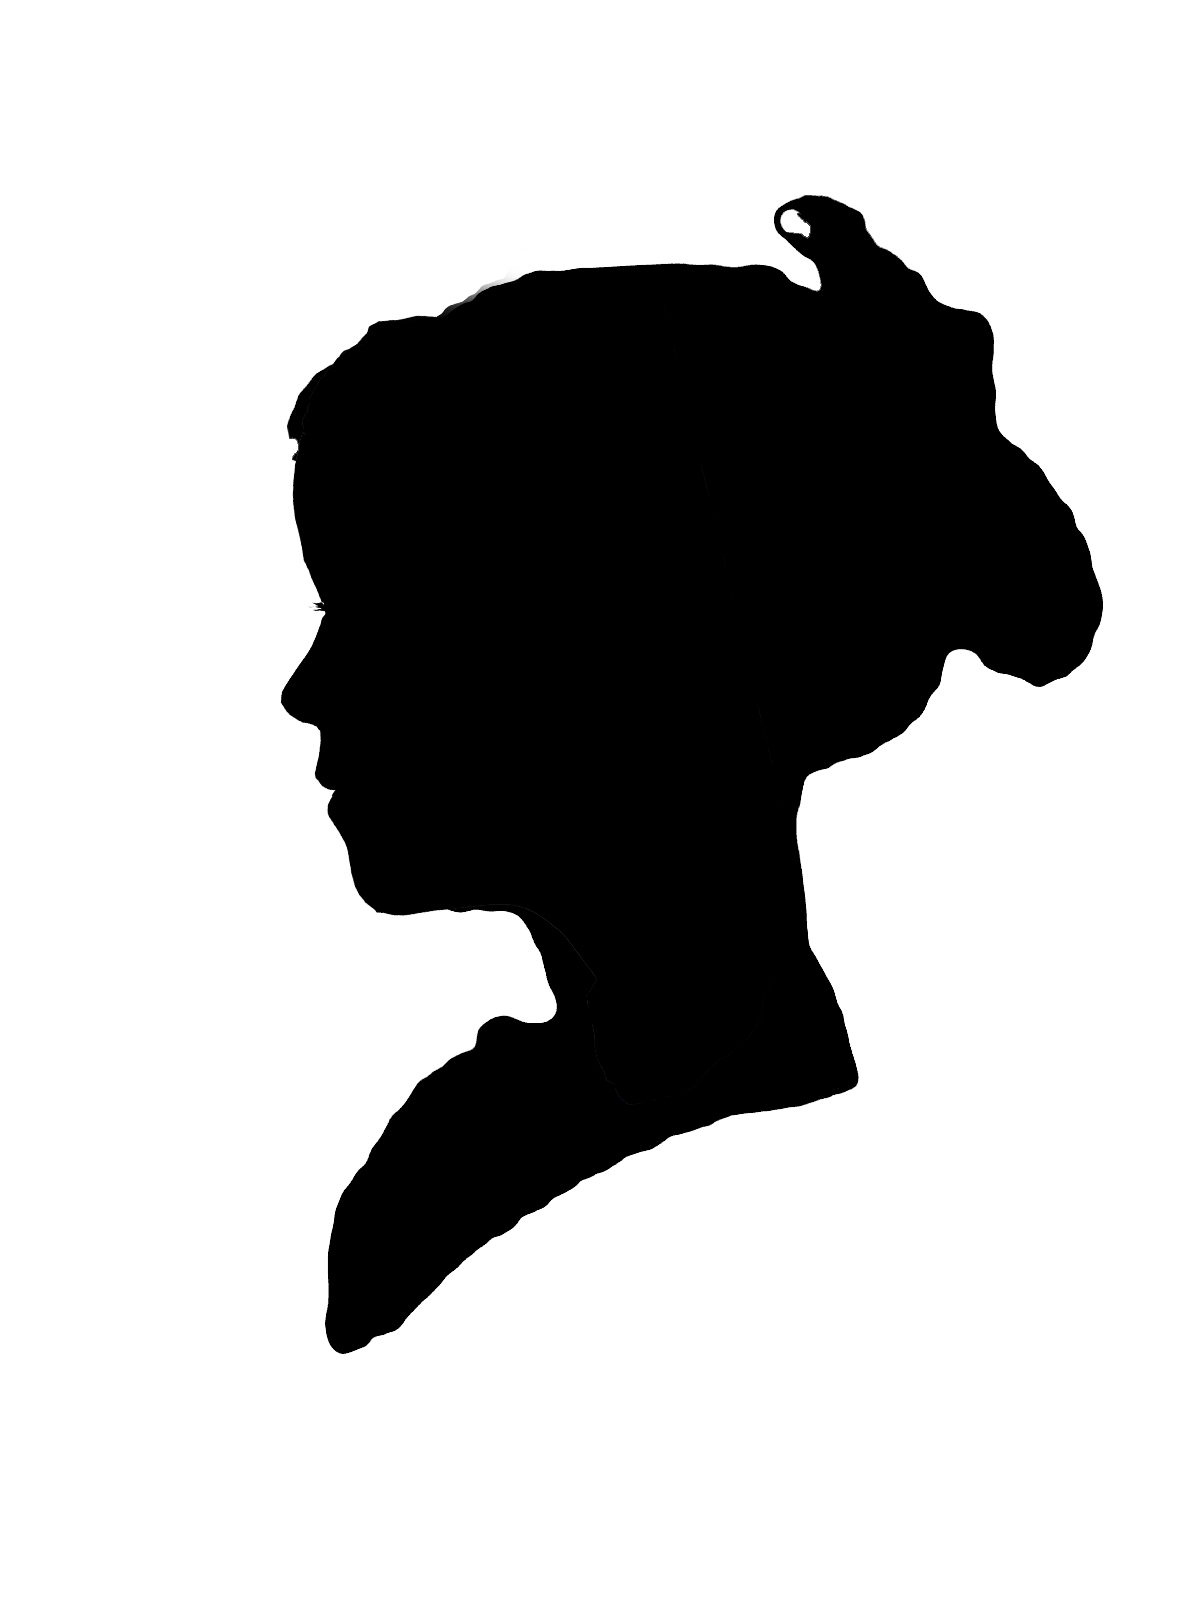 Woman at getdrawings com. Afro clipart silhouette portrait